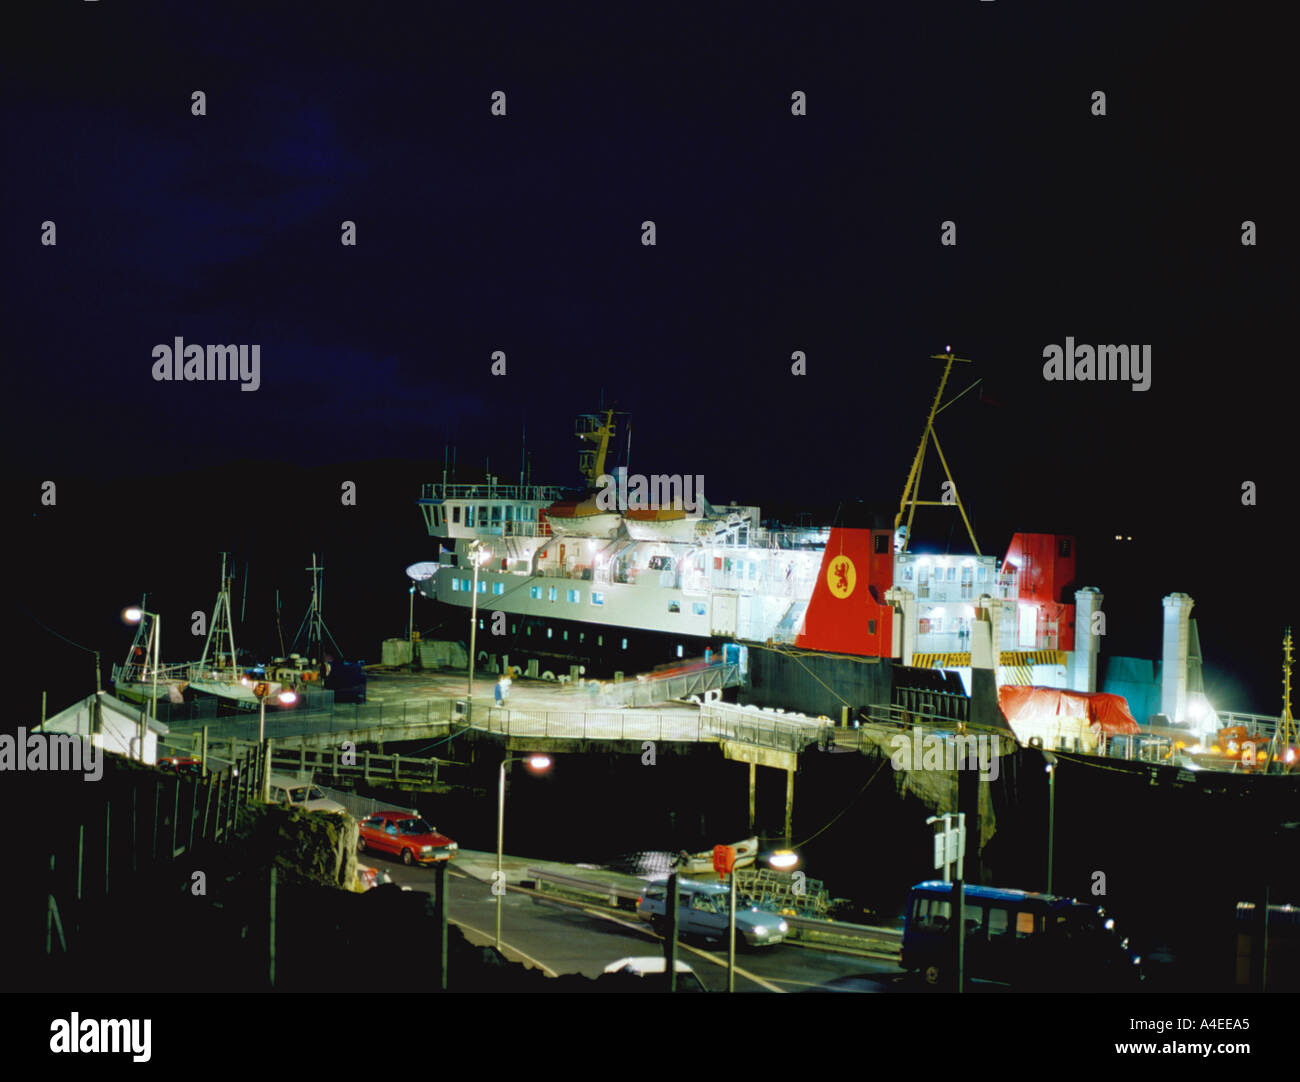 Cars disembarking from a roll on roll off ferry at night; Caledonian MacBrayne ferry at Barra, Outer Hebrides, Scotland, UK. Stock Photo